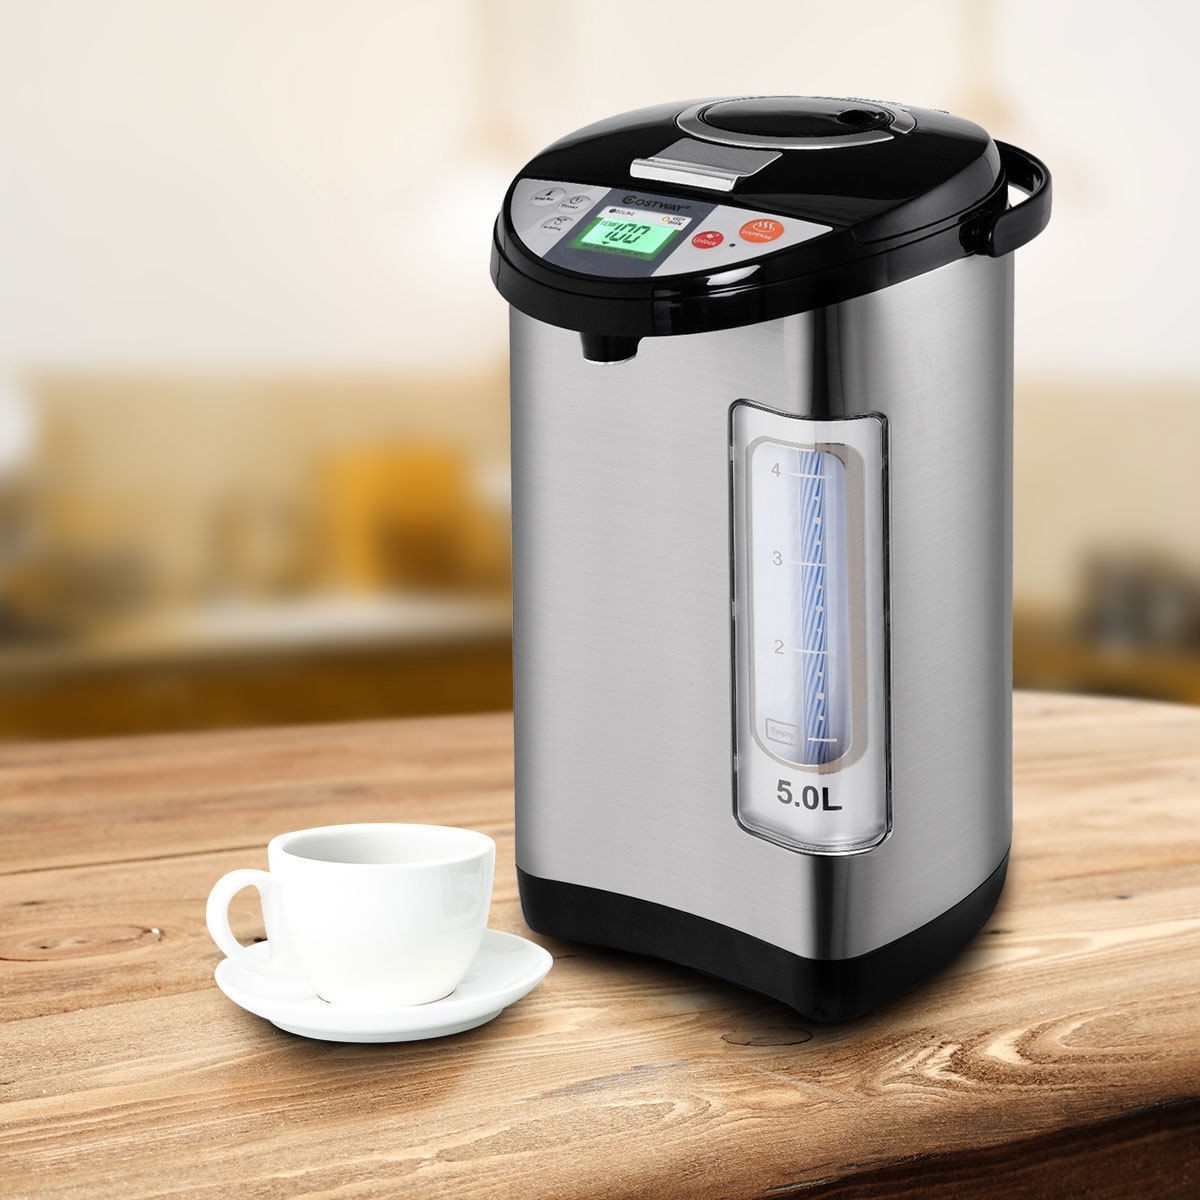 https://cdn2.momjunction.com/wp-content/uploads/product-images/cost-way-instant-electric-hot-water-boiler-and-warmer_afl1310.jpg